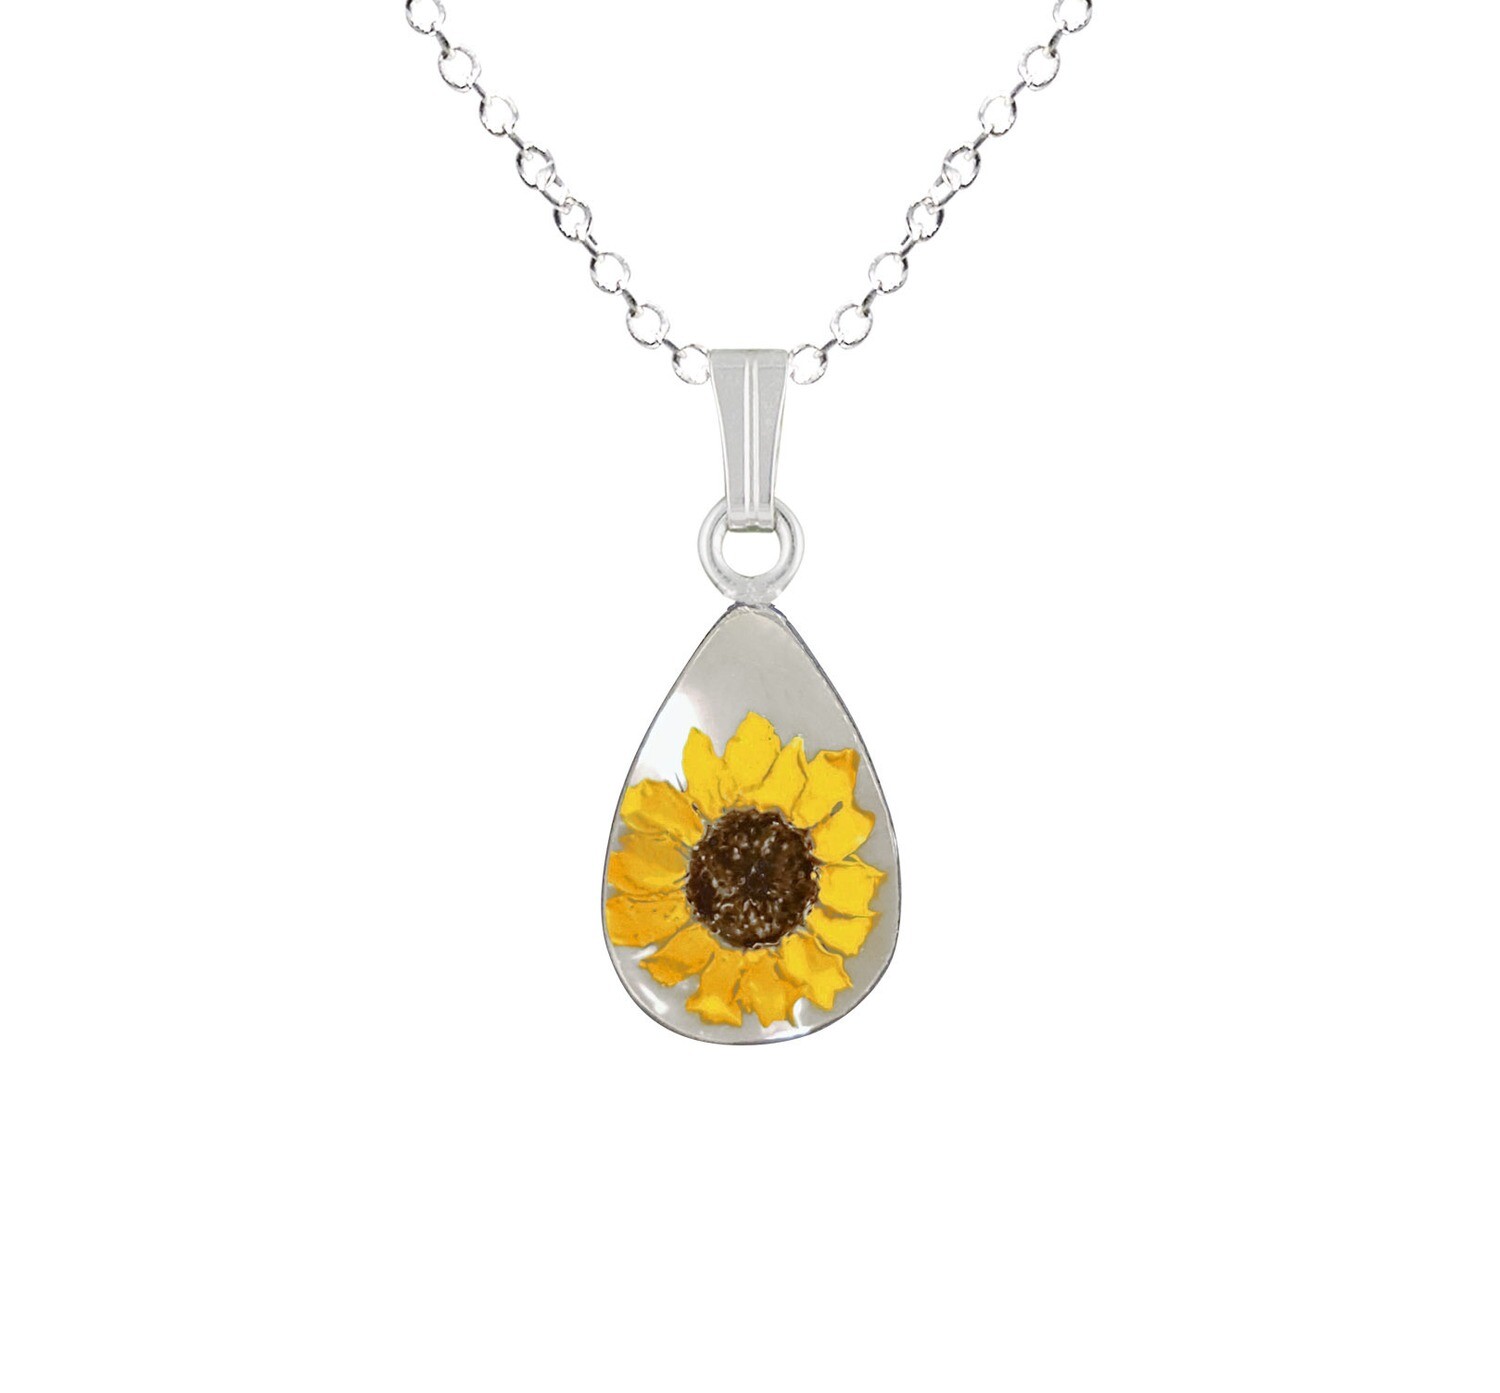 Sunflower Necklace, Small Teardrop, White Background